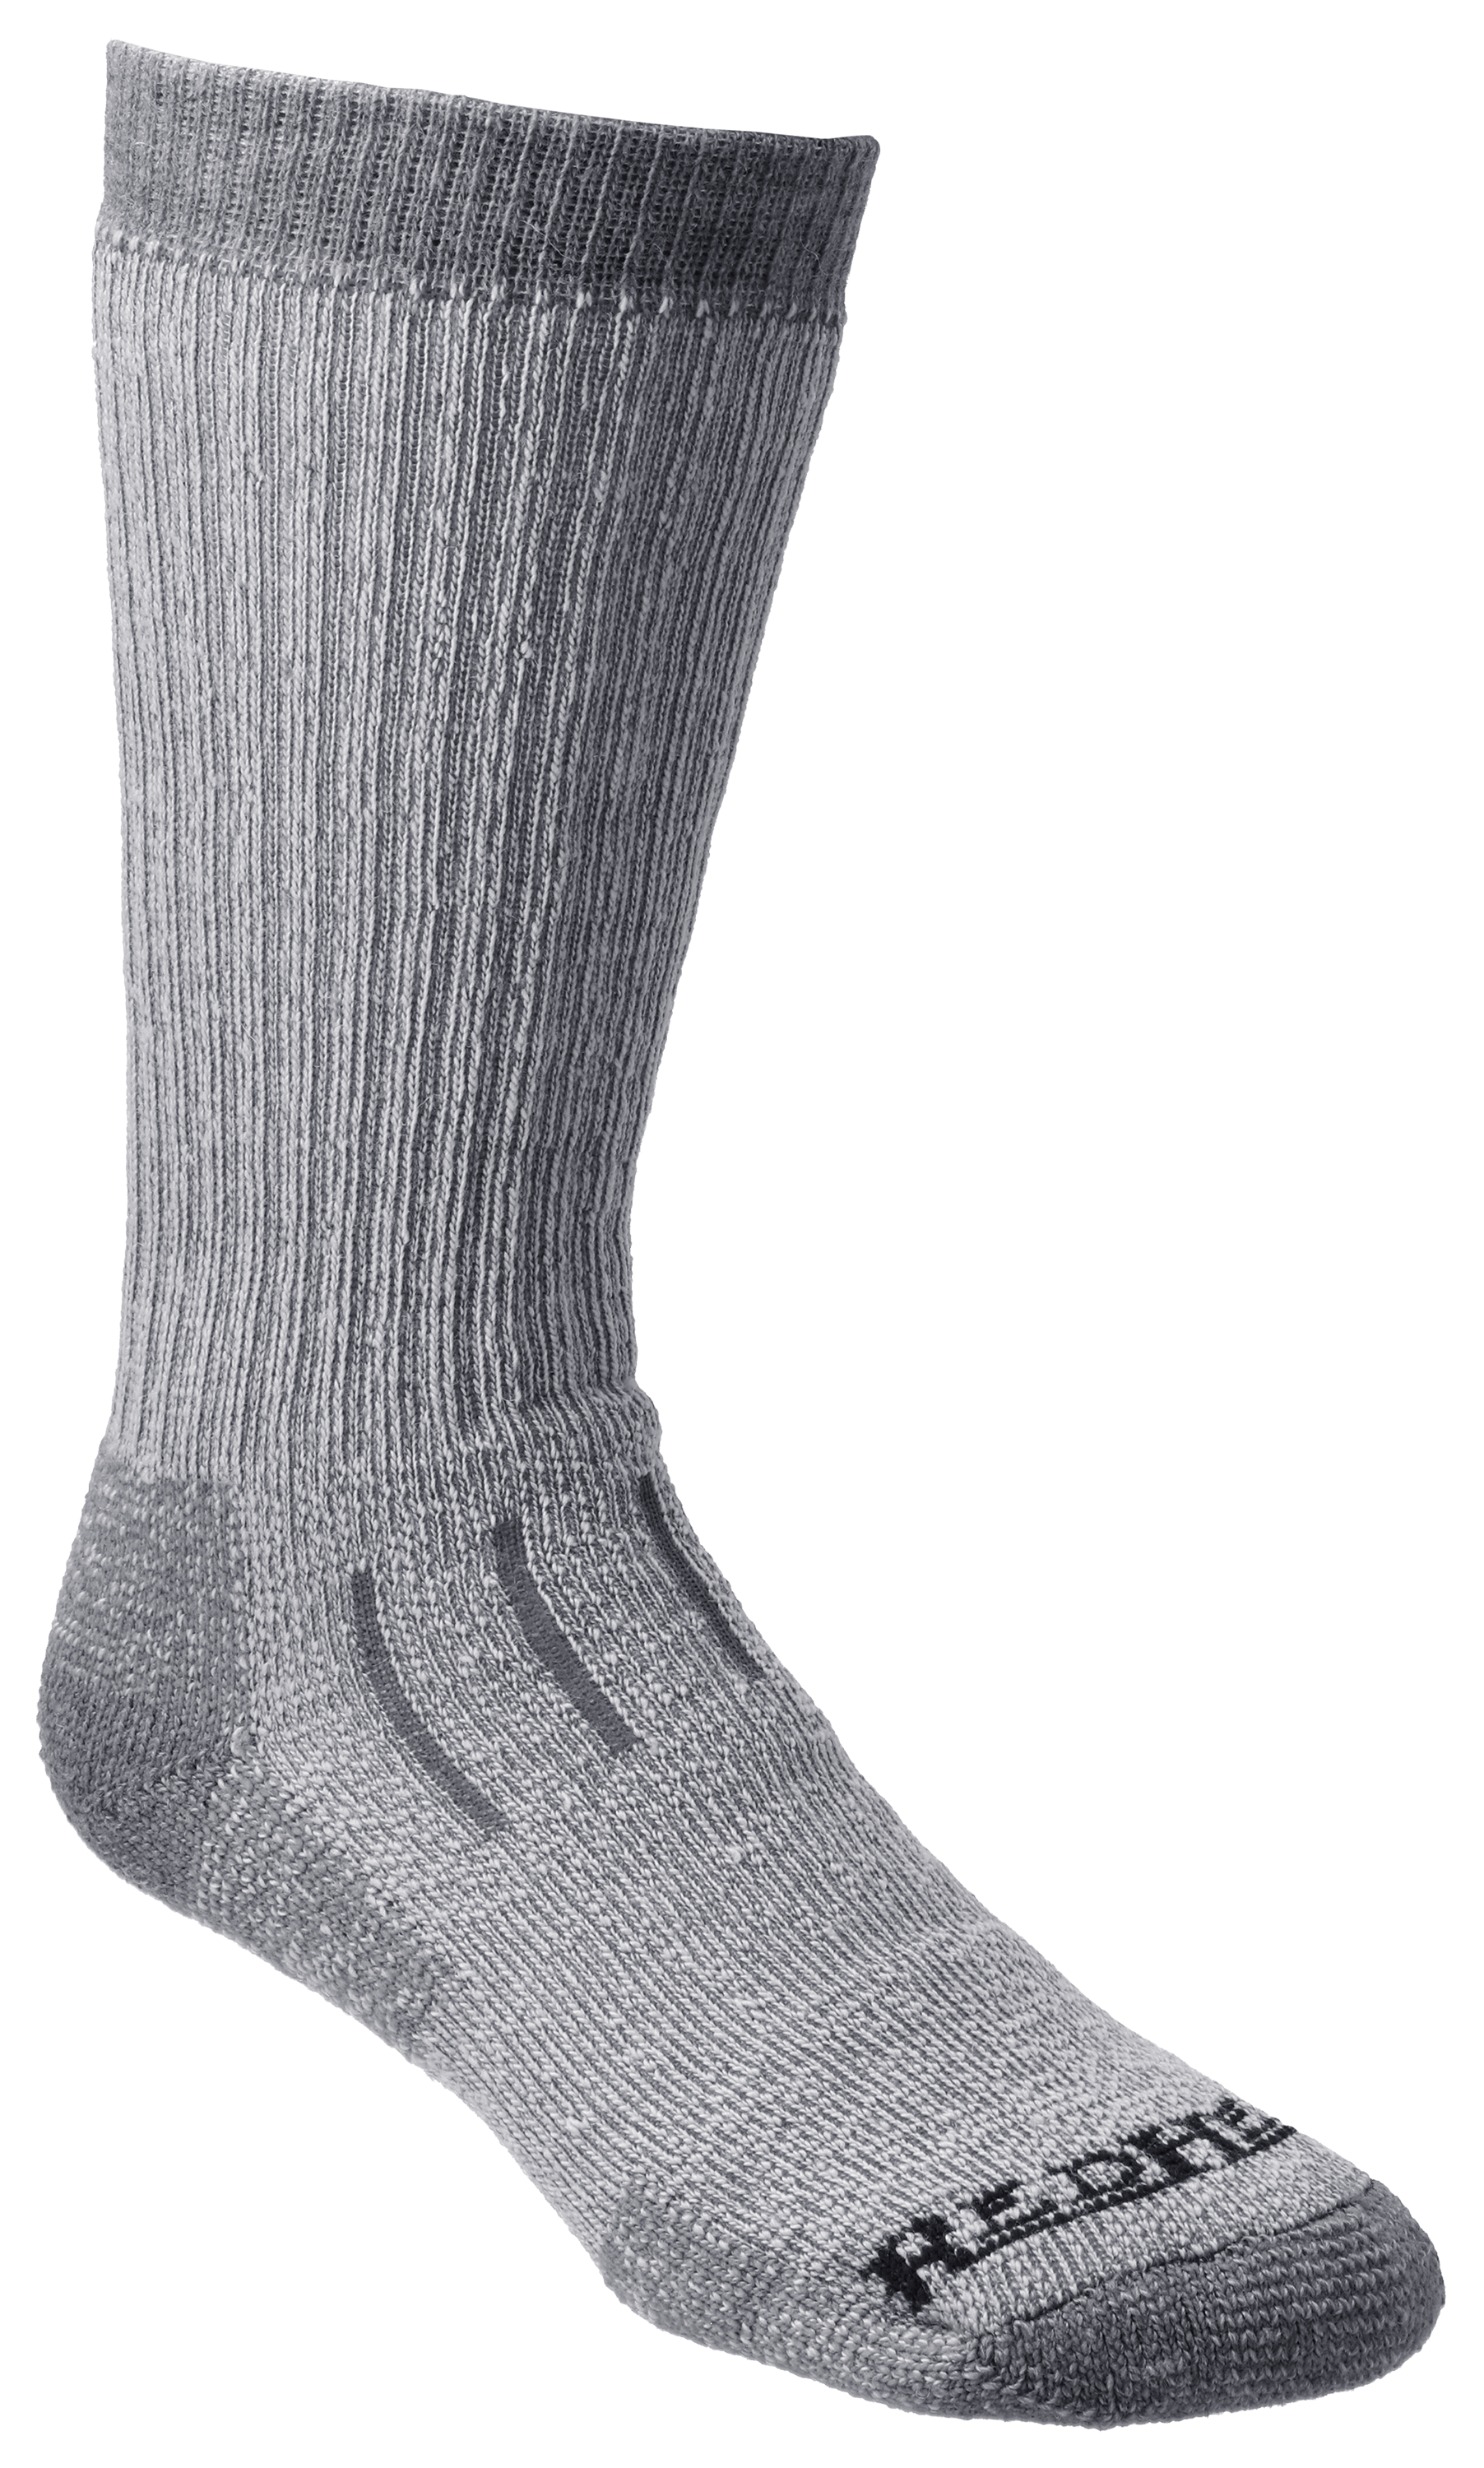 We're warming up this frosty week with a SOCK SALE! Smartwool 20